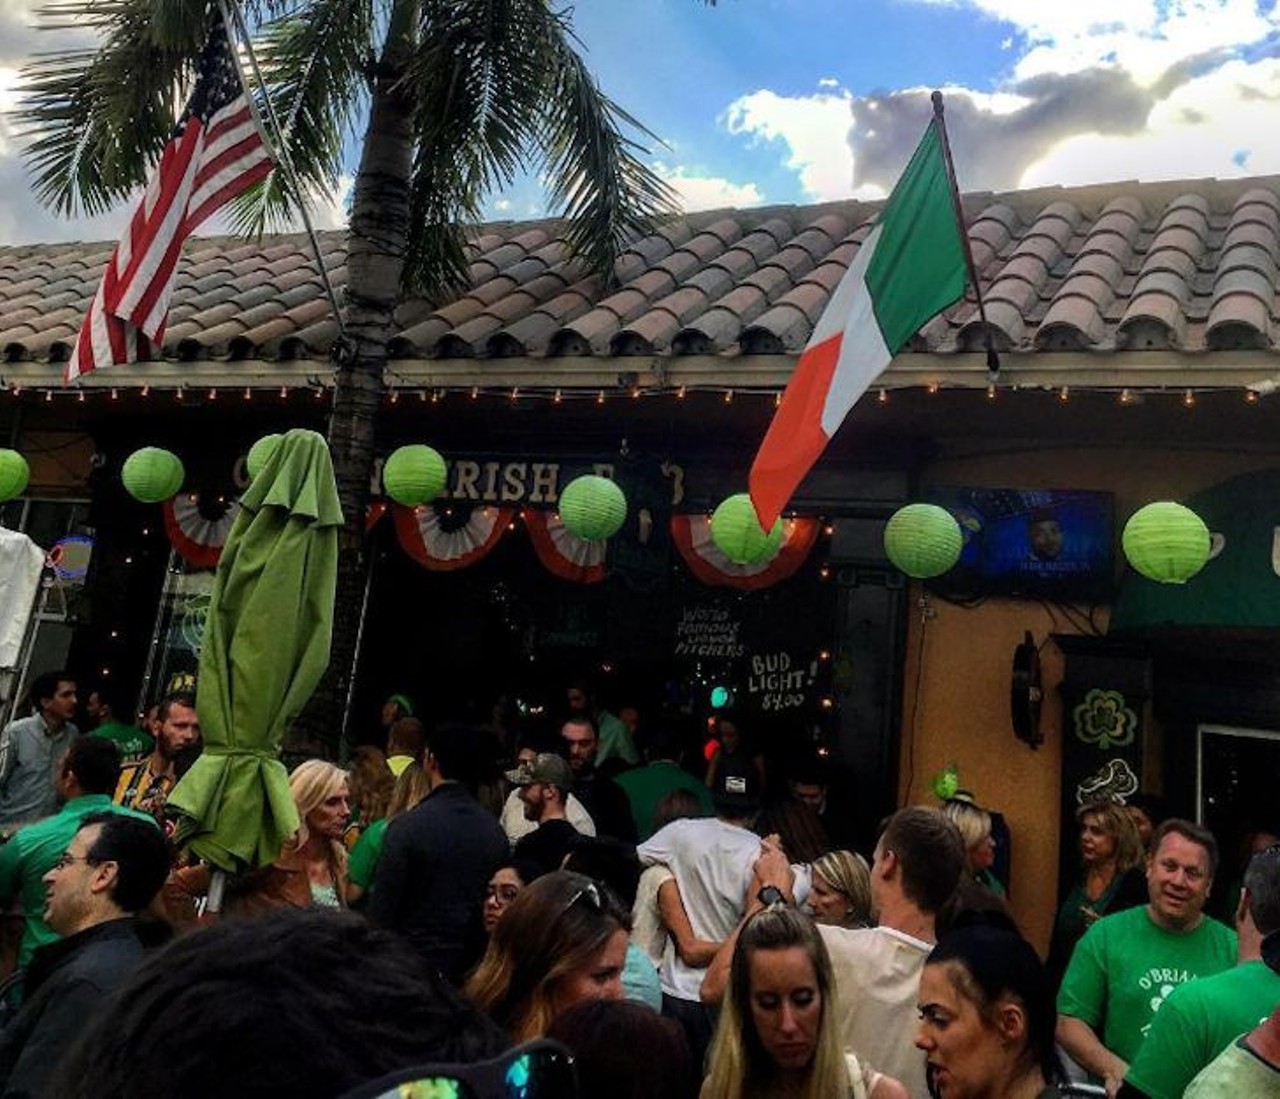 O&#146;Brians Irish Pub
51 SE 1st Ave, Boca Raton, (561) 929-3732
It&#146;s no secret that you don&#146;t choose to go to school in Boca Raton if you&#146;re trying to do anything for cheap, however, O&#146;Brian&#146;s is that saving grace all FAU students are looking for when trying to give their wallet a break, because this hole-in-the-wall Irish pub is definitely an escape from the upscale Boca lifestyle that surrounds it. 
Photo via trlax14m/Instagram